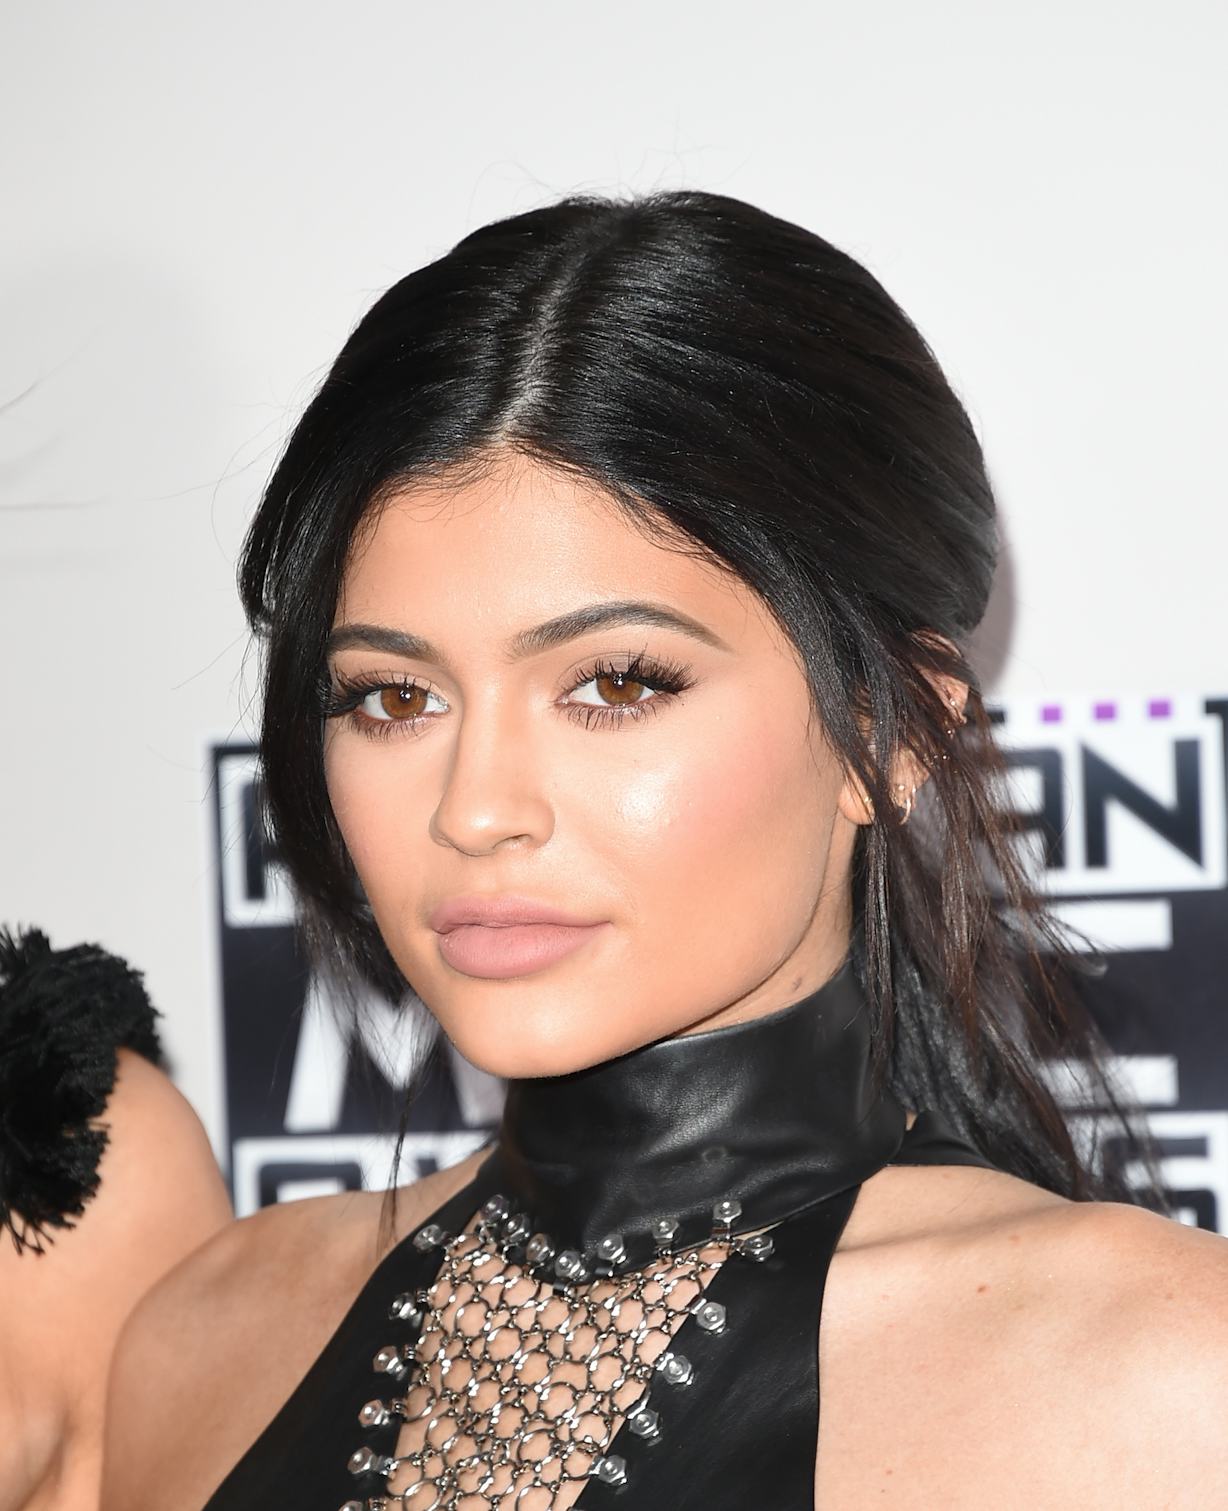 What New Kylie Jenner Lip Kit Colors Are Coming? The Shades Will Likely ...